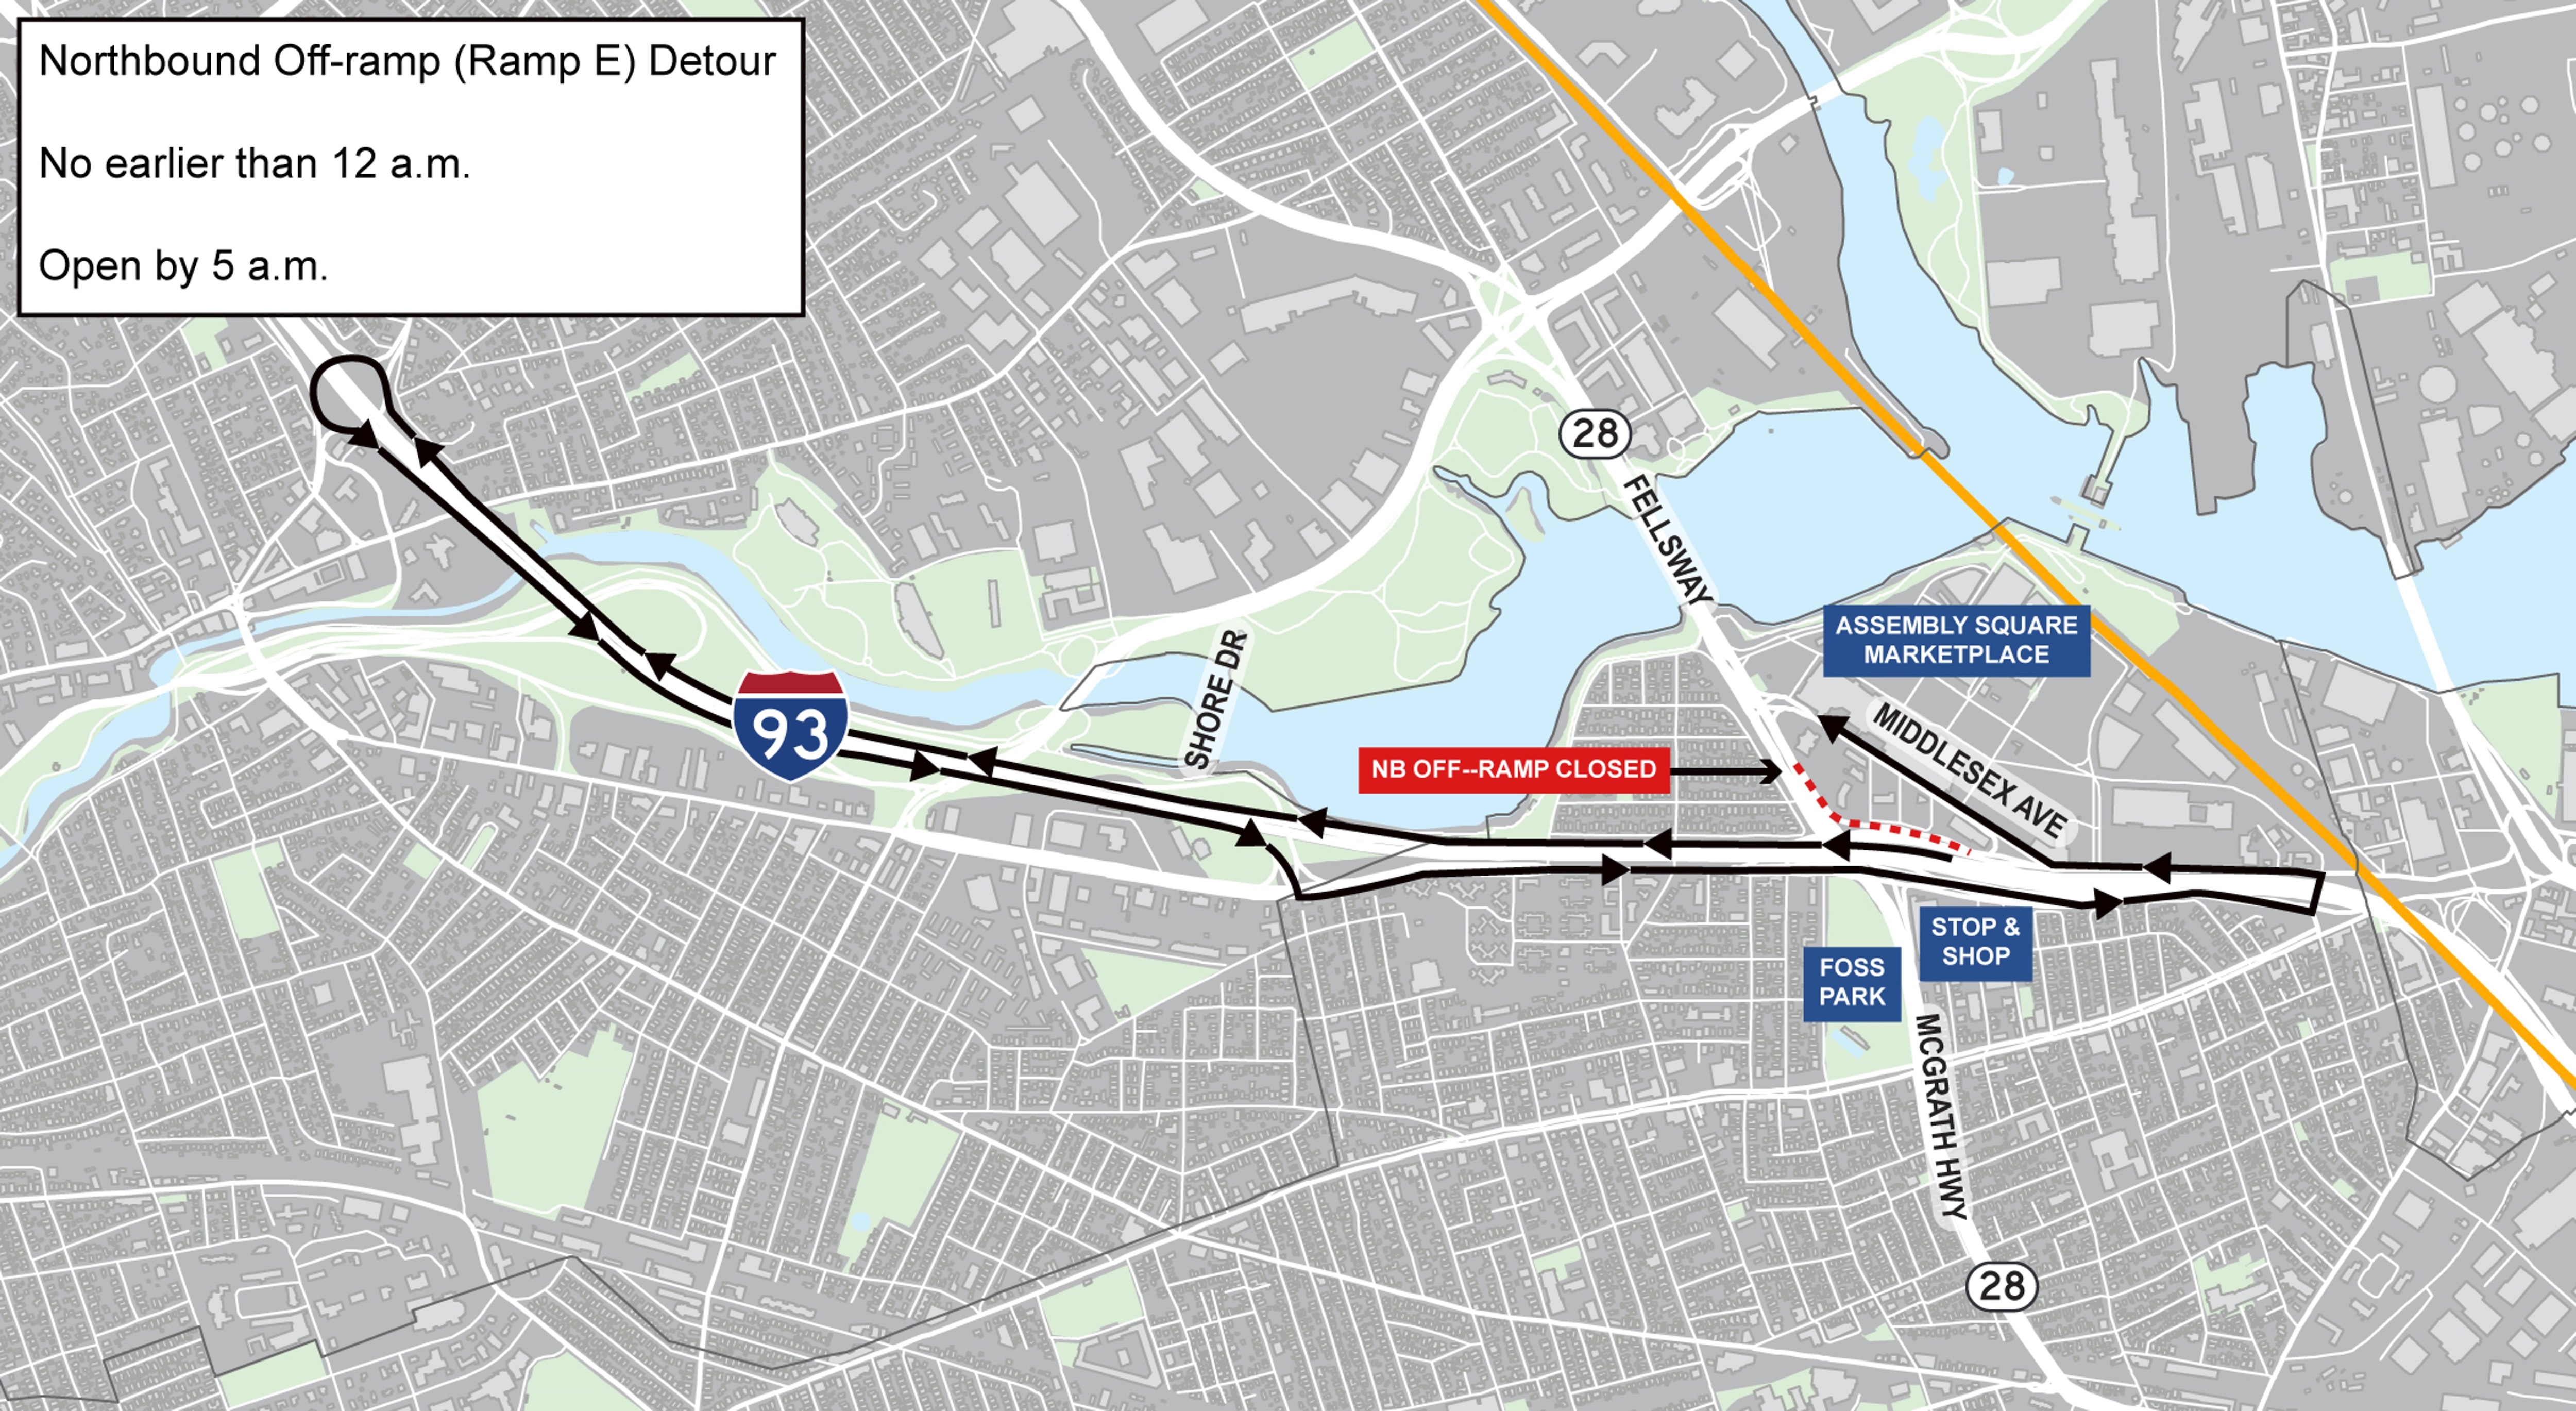 An aerial graphic showing the project location. The detour is depicted by an arrow going up I-93, doing a U-turn at the traffic circle, taking a left onto Middlesex Avenue, and then a right onto Route 28. The key says, “No earlier than 12 a.m. and open by 5 a.m.” Above the detour is a call out for the Assembly Square Marketplace, below is one for Foss Park, and to the right is one for Stop & Shop.